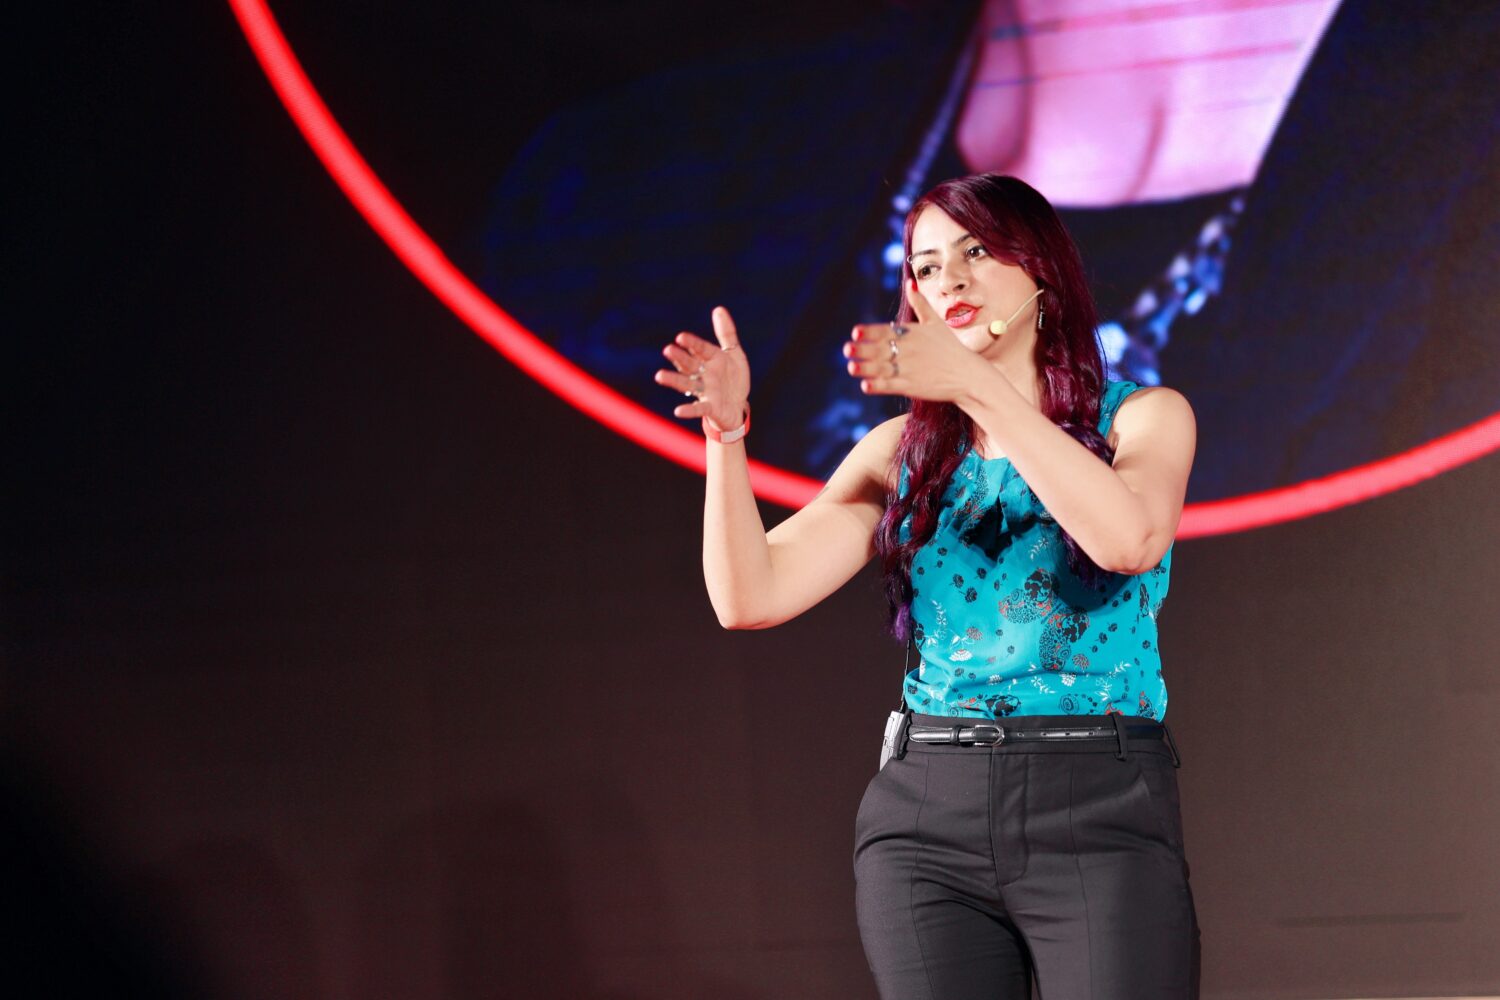 Nausheen Chen focusing on her talk on the TEDx stage in China